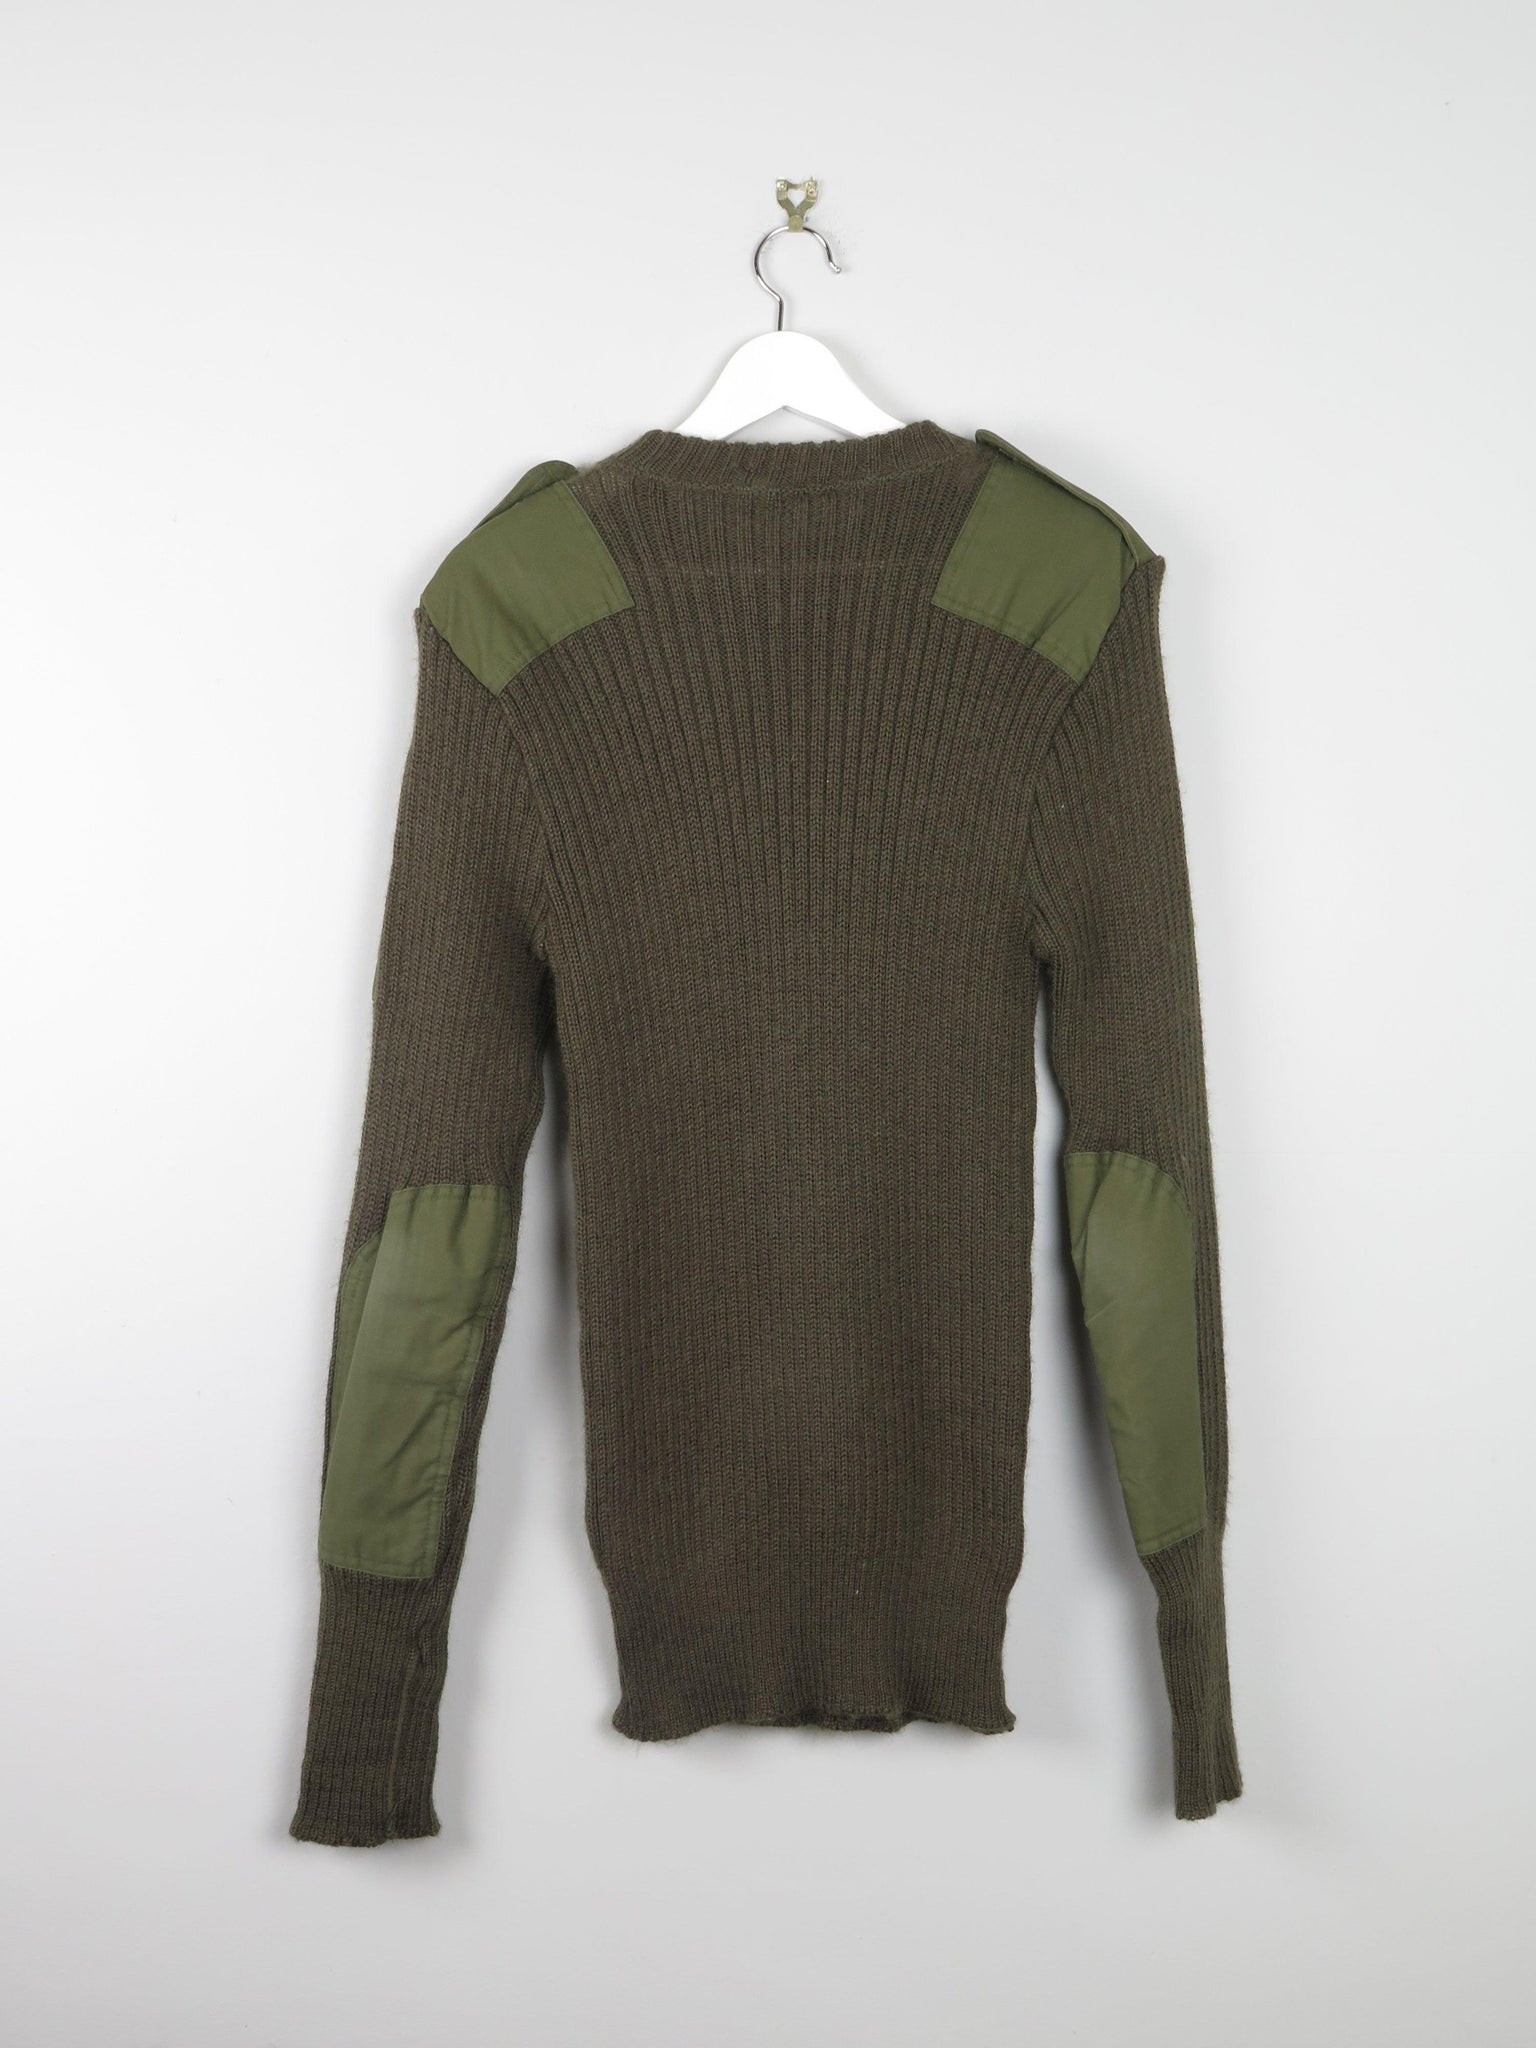 Mens Green Army Jumper M - The Harlequin